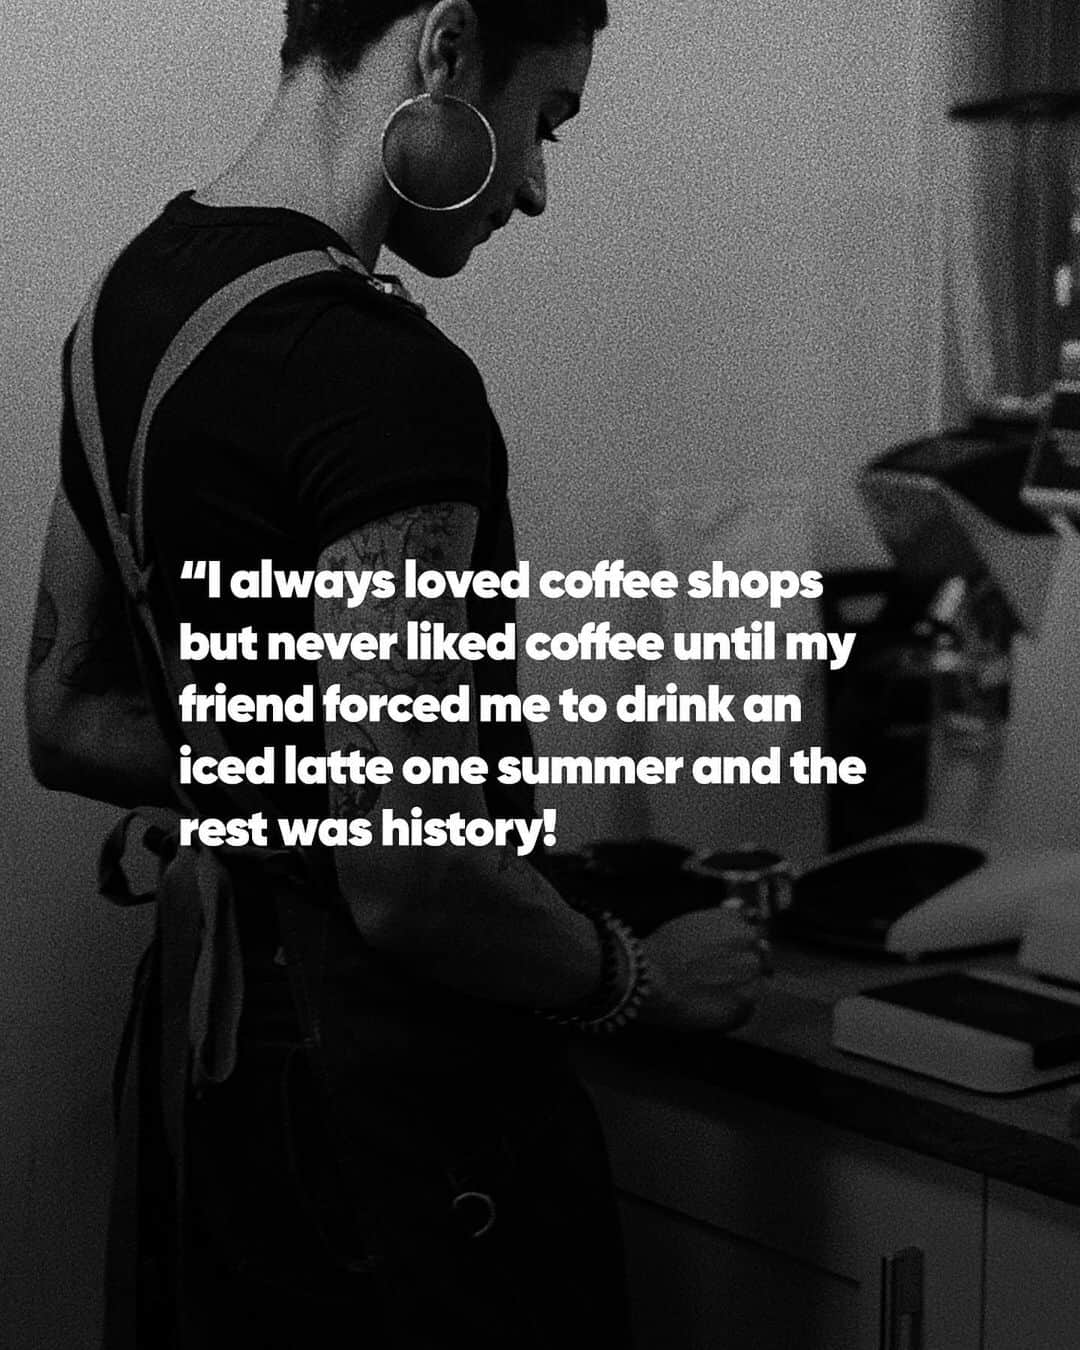 ジョディ・ウィリアムズさんのインスタグラム写真 - (ジョディ・ウィリアムズInstagram)「This is I’M NOT A BARISTA’s STORIES REWIND.  Who said athletes can’t brew? This is the story of Jodie Williams @jodiealicia. Jodie is a Great Britain Olympian who has been surging forward in her quest to be more than just an athlete. She blends her athleticism with her coffee experience as she pushes for better living conditions for women in coffee farming communities.  Jodie has taken a keen interest in women in coffee farming communities, specifically how they are affected by low wages and a lack of opportunities for leadership and management. She is an ambassador for Femlead, a Ugandan NGO that works to empower young women to reach their full potential through educational workshops and local community engagement.   Article by Oluwatobifunmi Olaniran. Read the full article with the link in our bio.  —  We need your help, act today.  We have featured hundreds of coffee stories on the internet. Now we want to bring their voices to the front line and share their stories directly with coffee lovers in coffee shops, at homes, in bookshops, and everywhere coffee enthusiasts exist. And for those with reading disabilities or too busy to sit down to read, we invited professional narrators to narrate these stories for your listening pleasure. For only $28, you will have a beautiful hardback and an audio book with 101 coffee stories you can listen to on the go.  Act today, back the book on Kickstarter, ask your coffee friends to join us and give a voice to coffee people like you. For only $28 USD, you can get a beautifully designed book of coffee stories, and an audio book.  — Want to share your story? Check the link in our bio and DM us.  #iamnotabarista  #baristaonbike #coffeetrainer  #coffeewristband #coffeestory #barista #speicaltycoffee #rewind #coffeestories #101coffeestories #love #coffeelover #coffeelove #coffeecommunity #colombia #sunday #coffeeroaster #coffeefarmer #mexico #girlpower #brewbar #咖啡师 #咖啡 #バリスタ #باريستا #قهوة #コーヒー #café #caffè」11月21日 21時33分 - jodiealicia